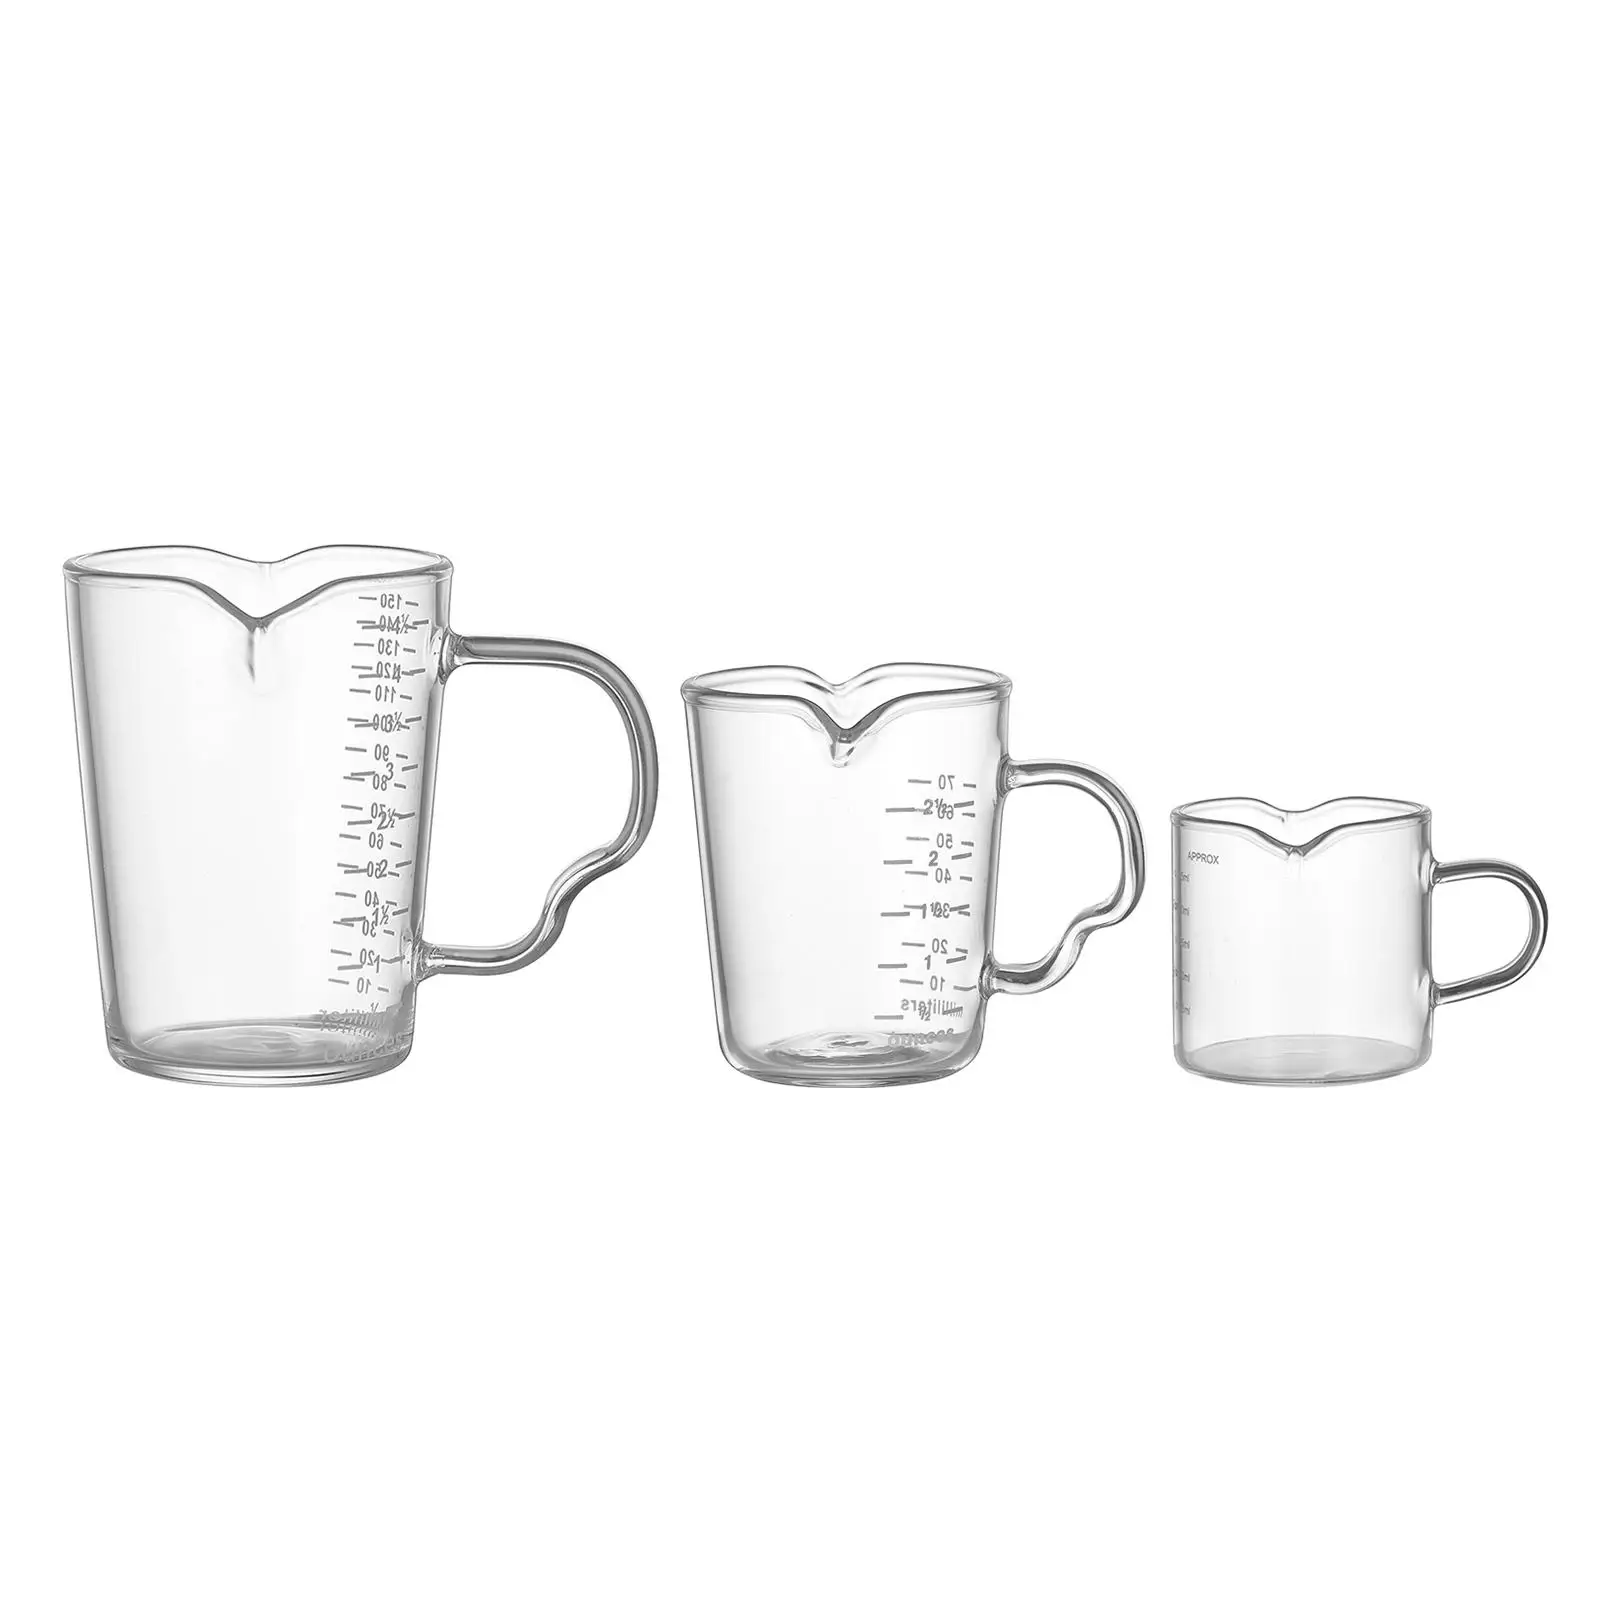 Multifunctional Glass Measuring Cup Heat-resistant Shot Glass and Scale Ounce Mug for Tea Drink Shaker Coffee